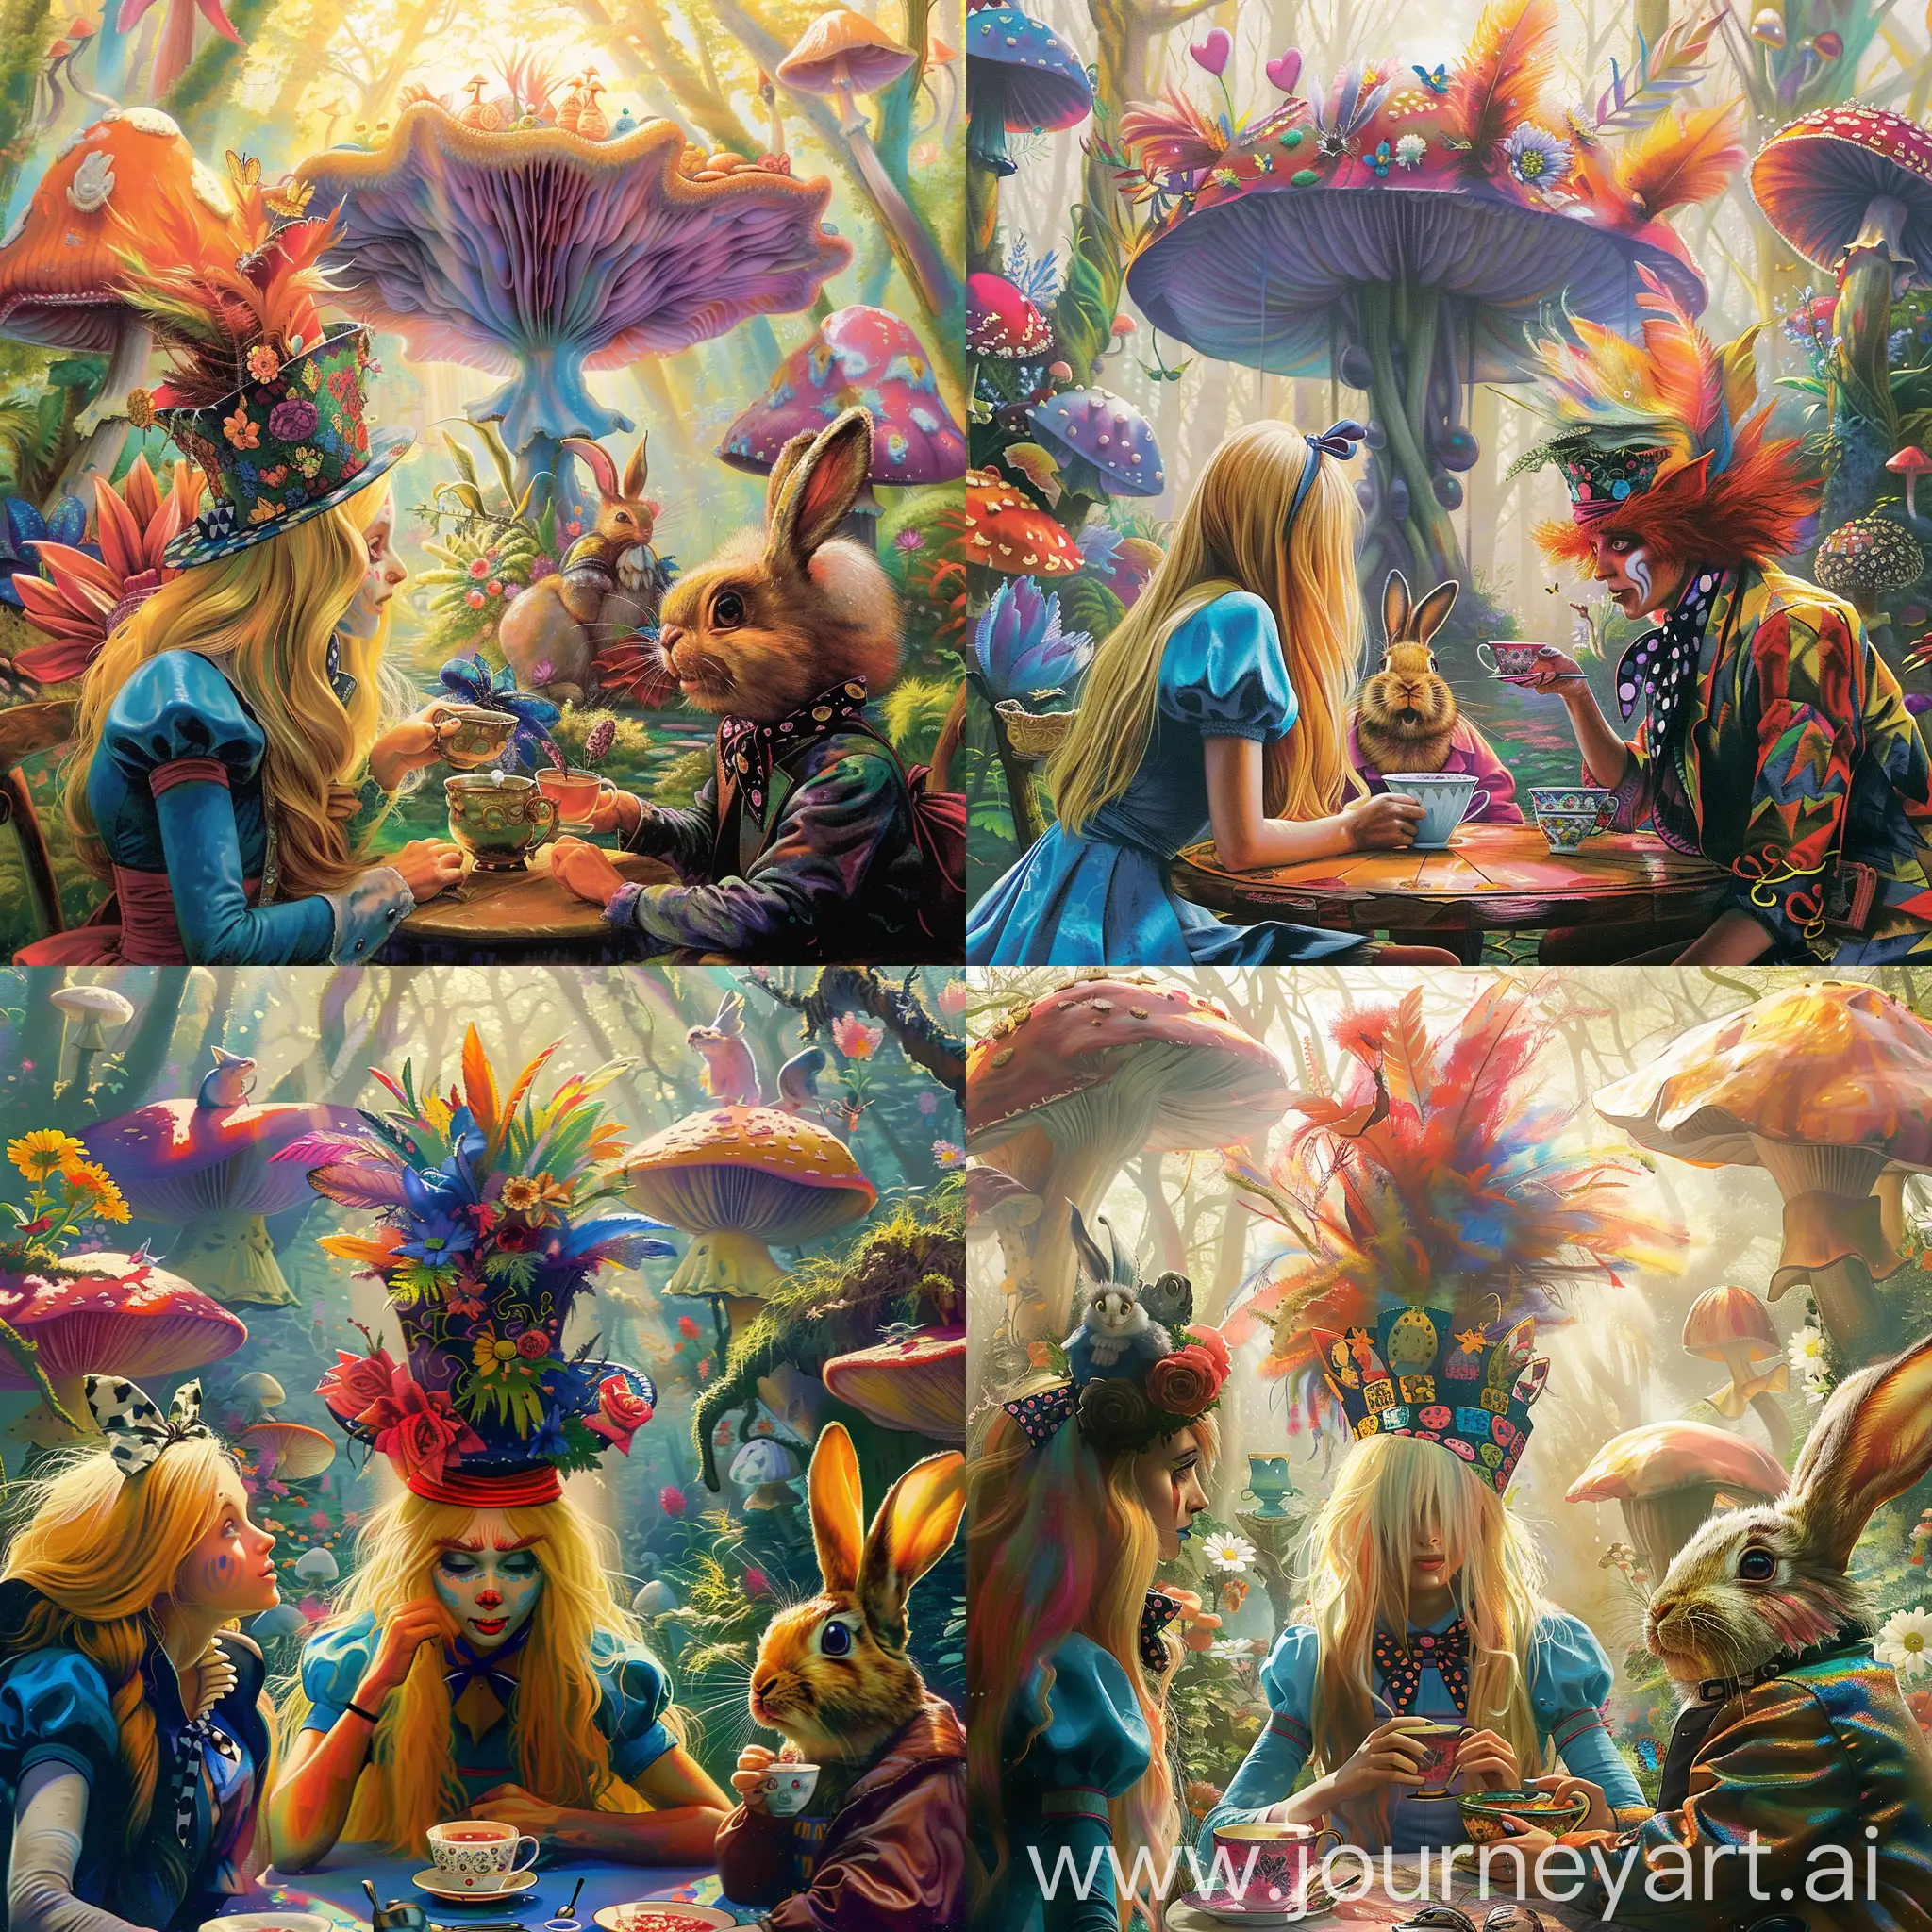 Alice drinking tea with the Mad Hatter and the March Hare in a psychedelic forest full of giant mushrooms and talking flowers, bright colors, fantasy style, sun shining, cheerful mood, high quality, high detail, Alice girl with blond hair in a blue dress. She has long hair and a bow on her head. A hatter is a man in a multi-colored suit and bright hair, on his head is a large hat with flowers and feathers. March hare in a jacket. He looks stupid. They all sit at the table and drink tea.